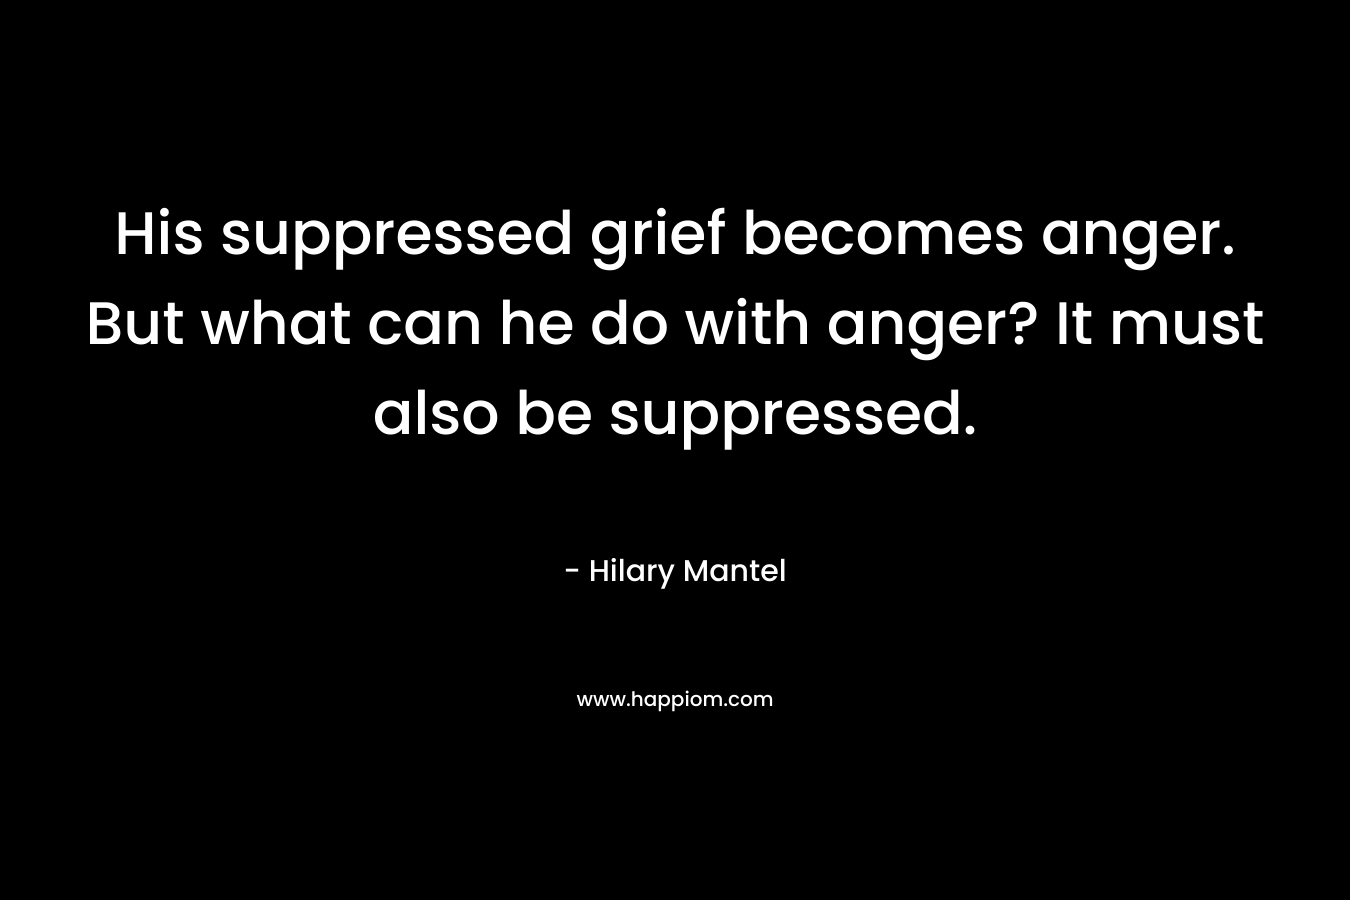 His suppressed grief becomes anger. But what can he do with anger? It must also be suppressed.